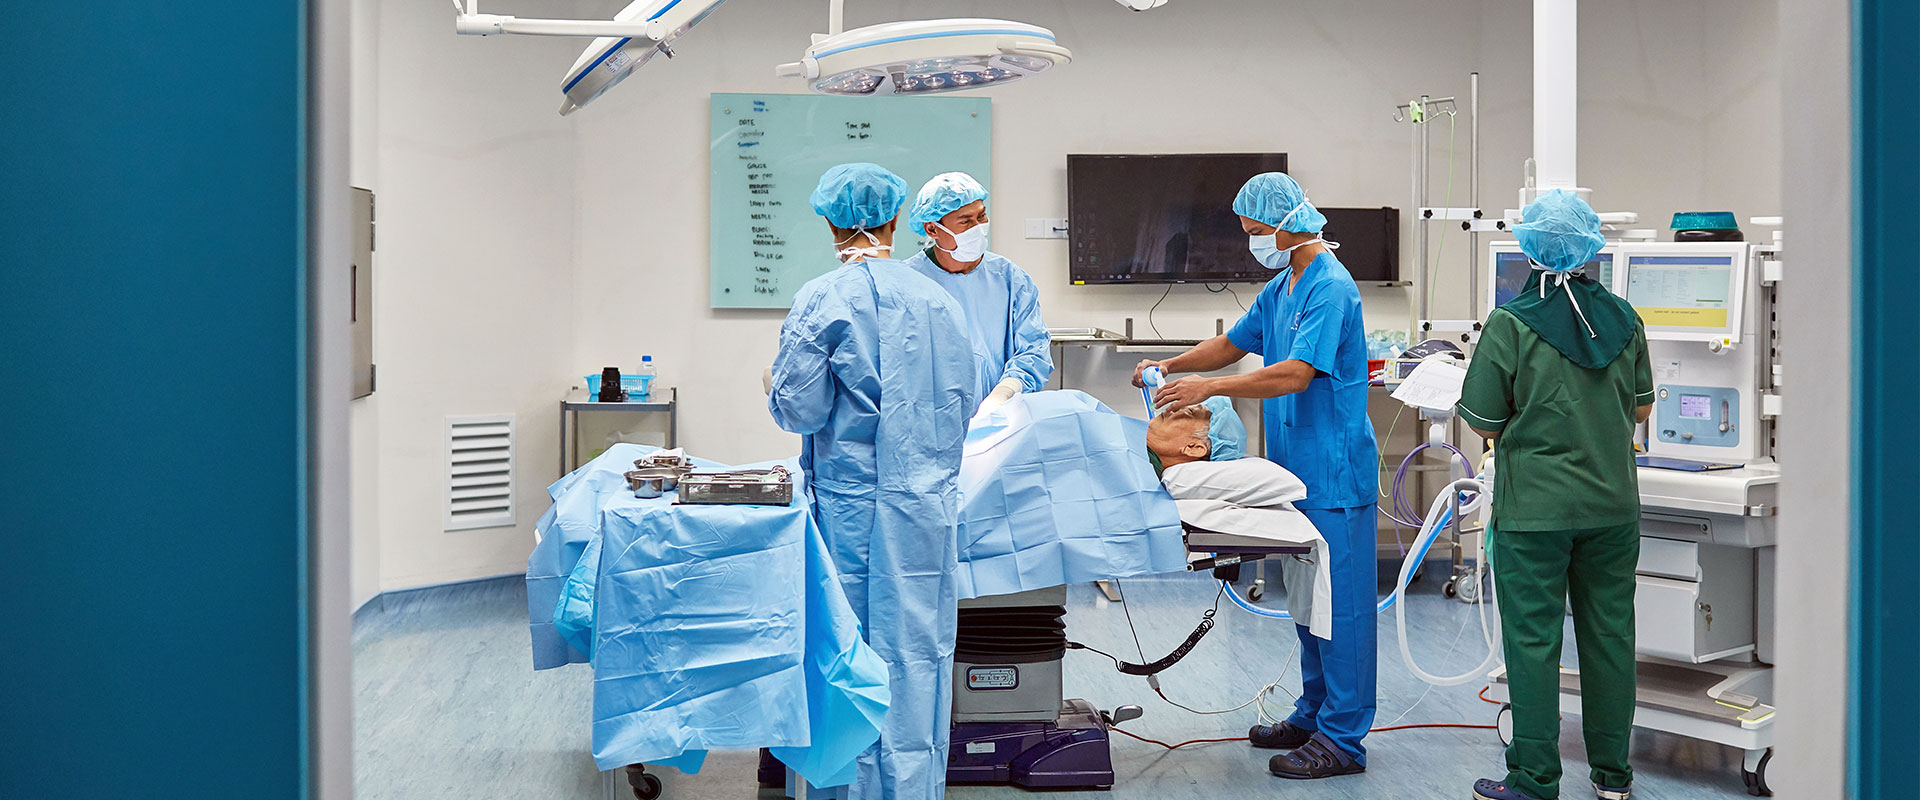 medical staff in operating room